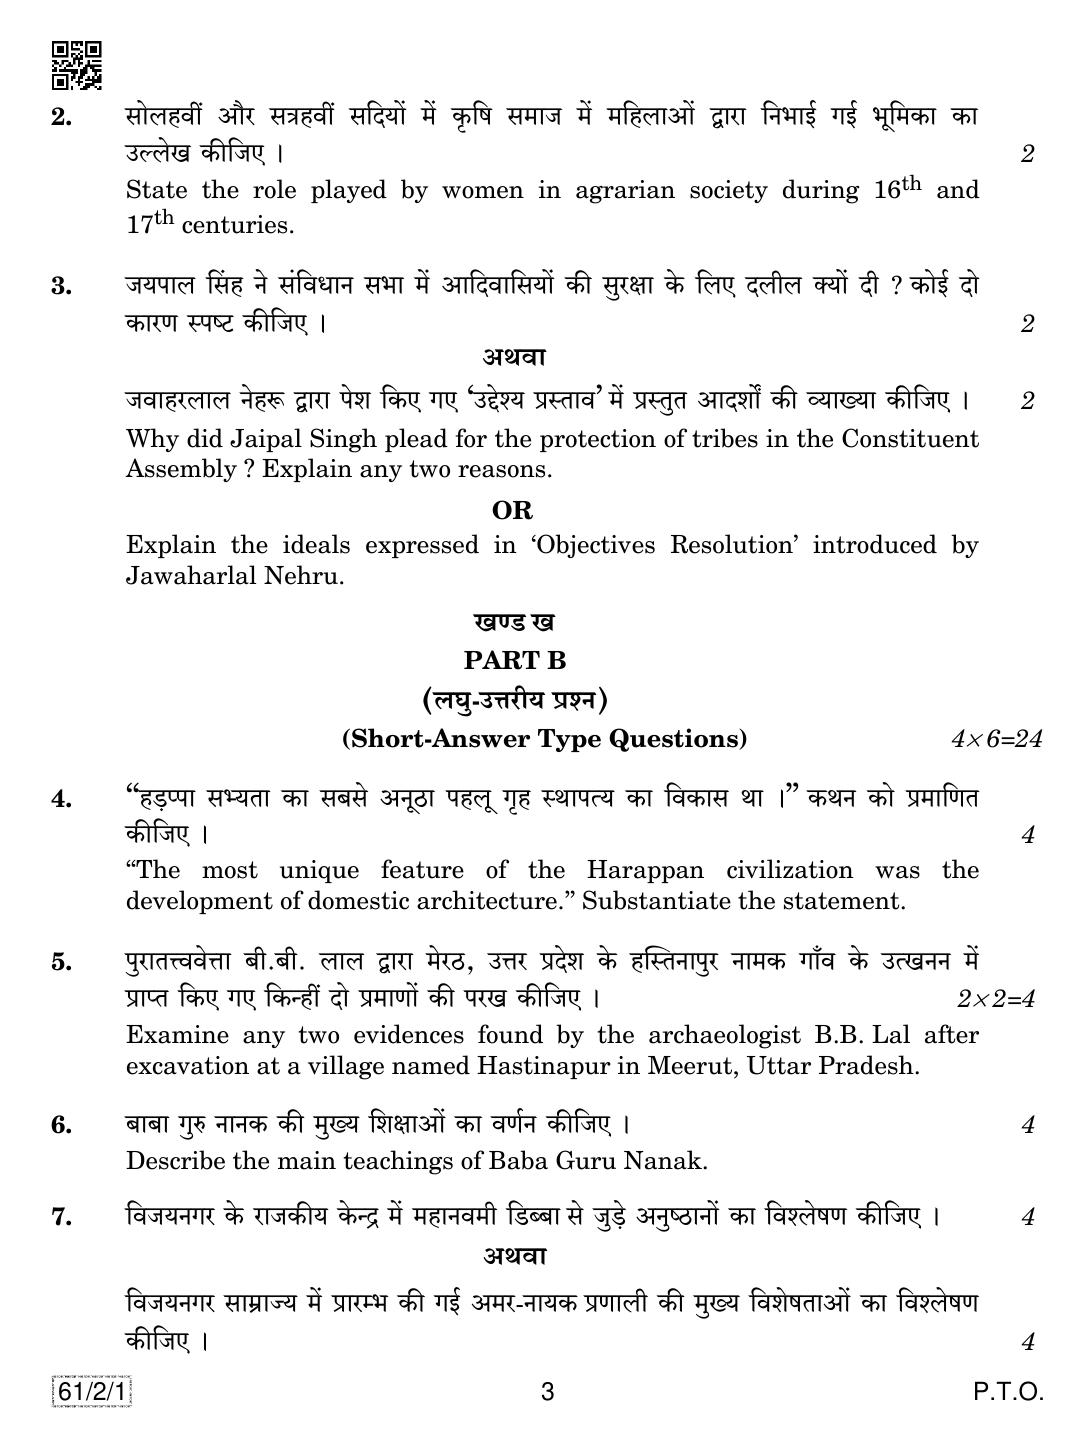 CBSE Class 12 61-2-1 History 2019 Question Paper - Page 3